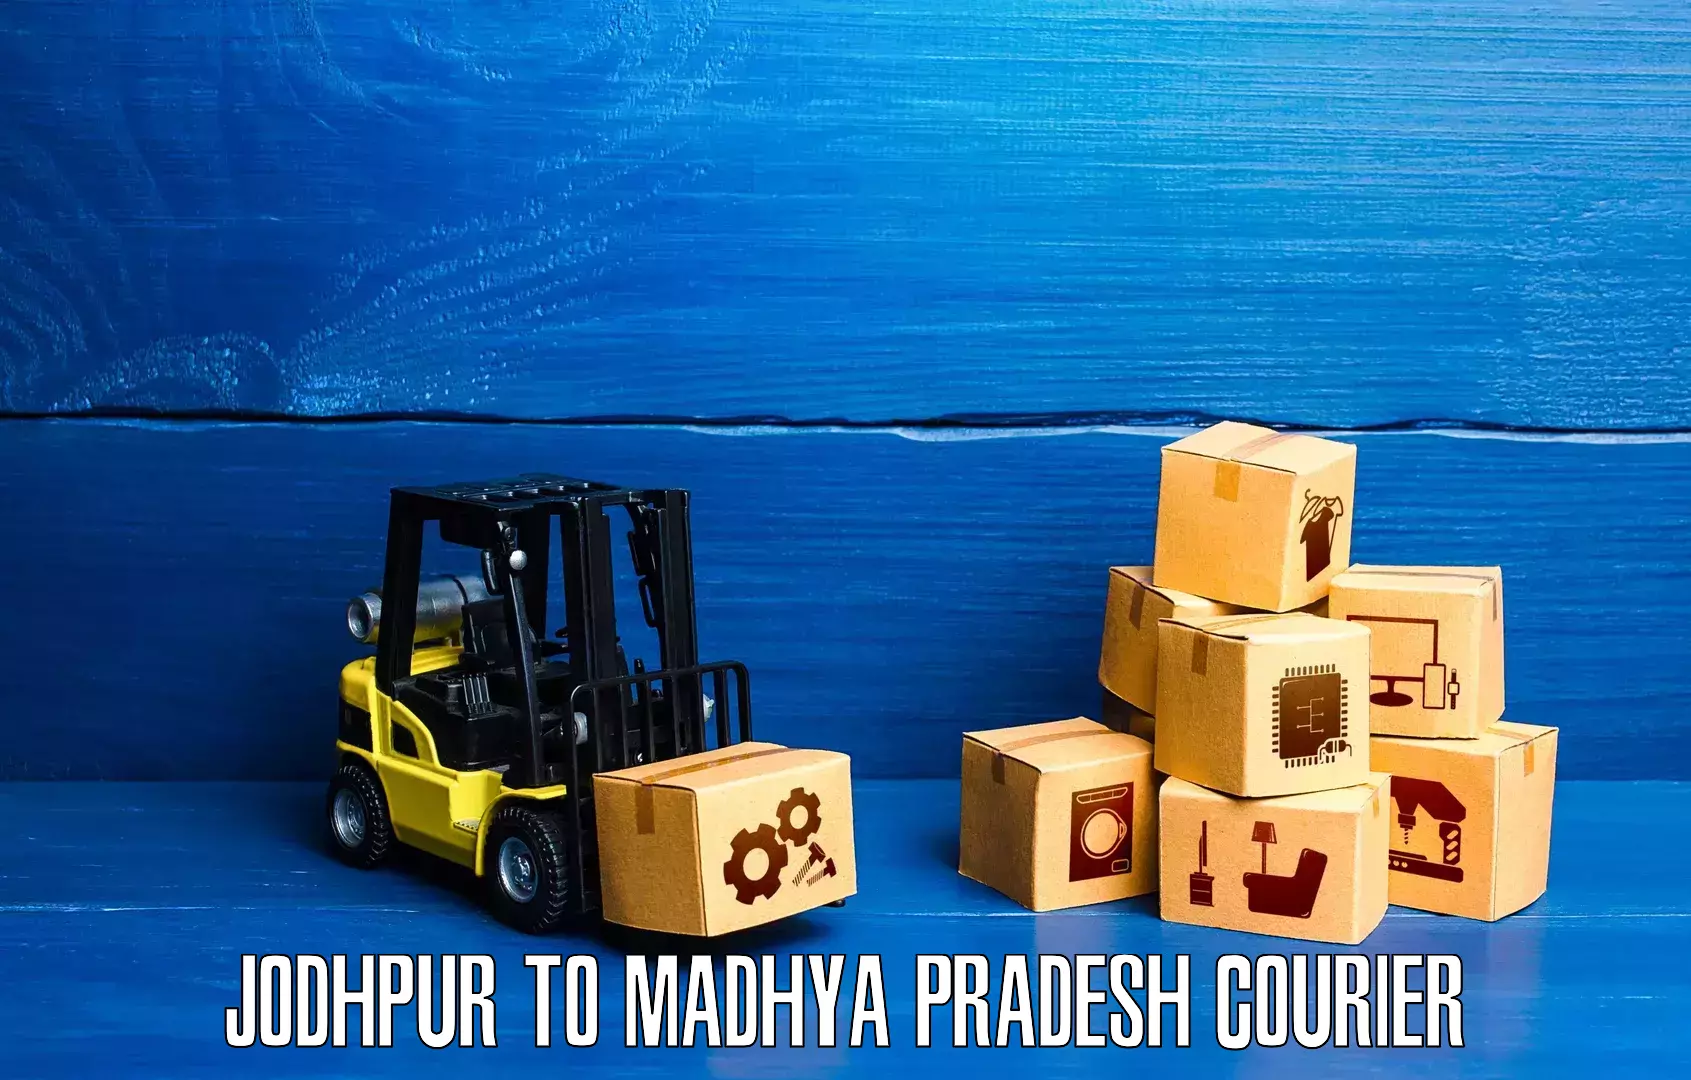 Overnight delivery services Jodhpur to Prithvipur